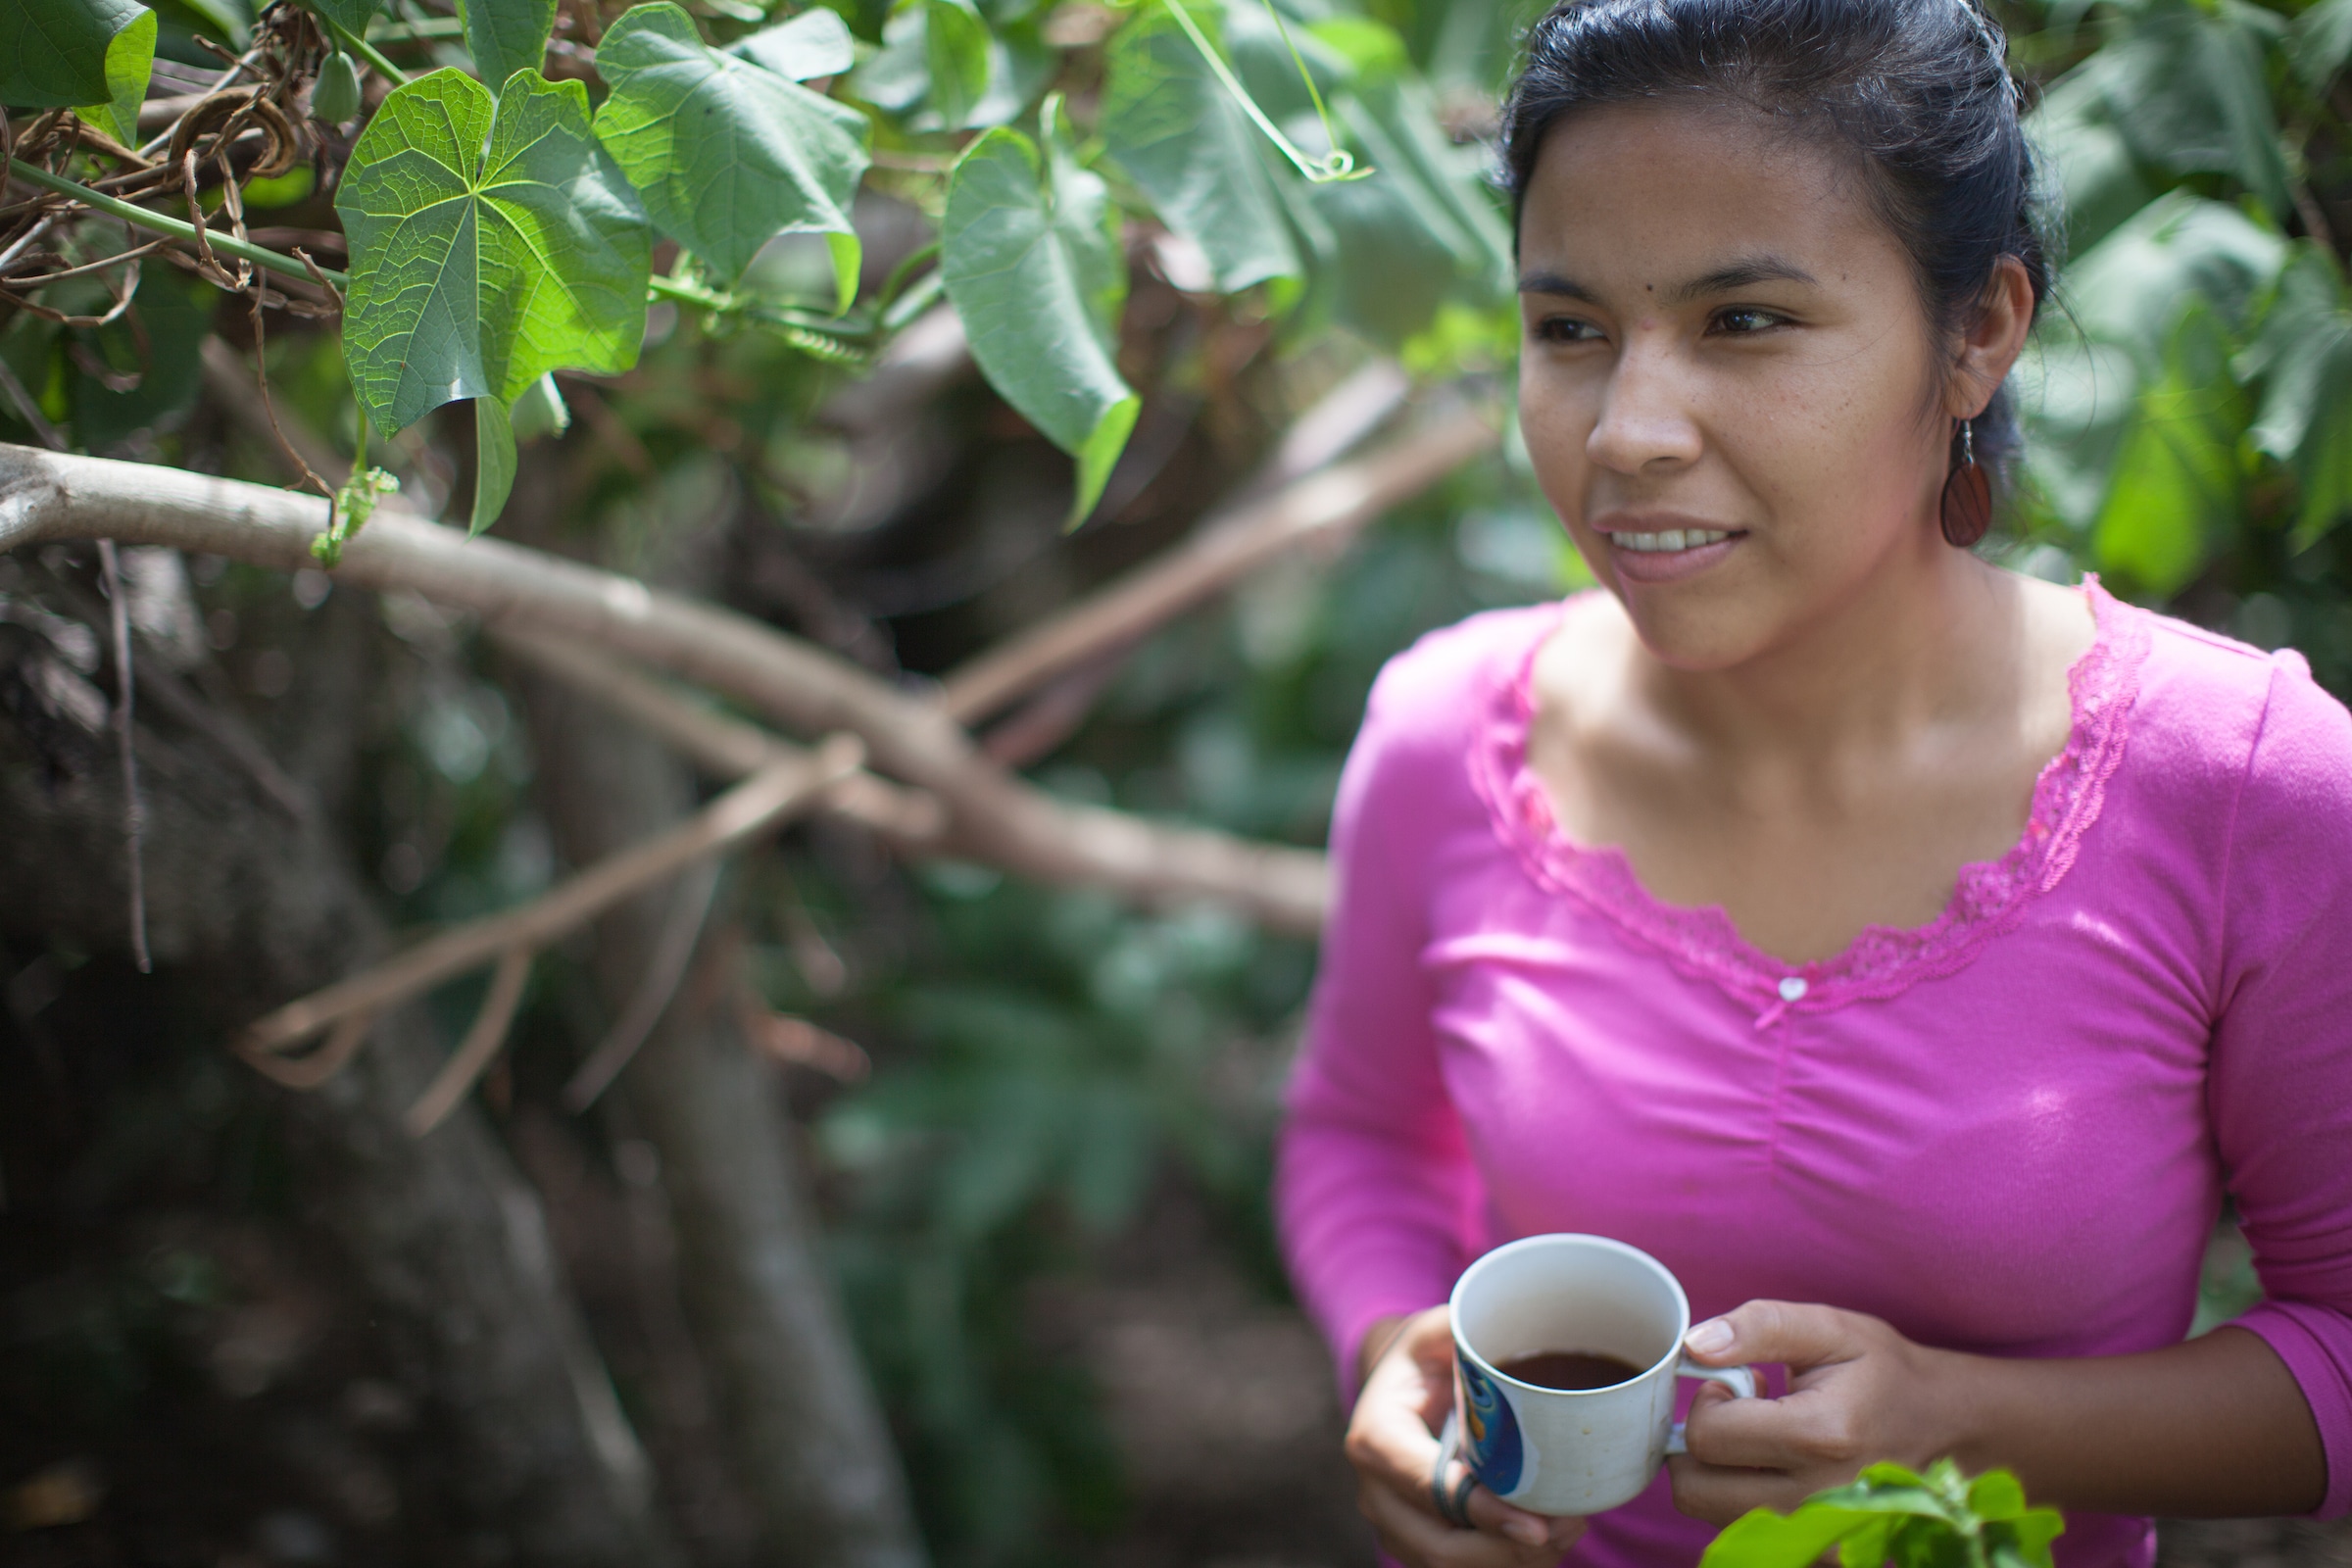 The Farmer Who Grew Your Coffee Is Losing Money on Every Cup